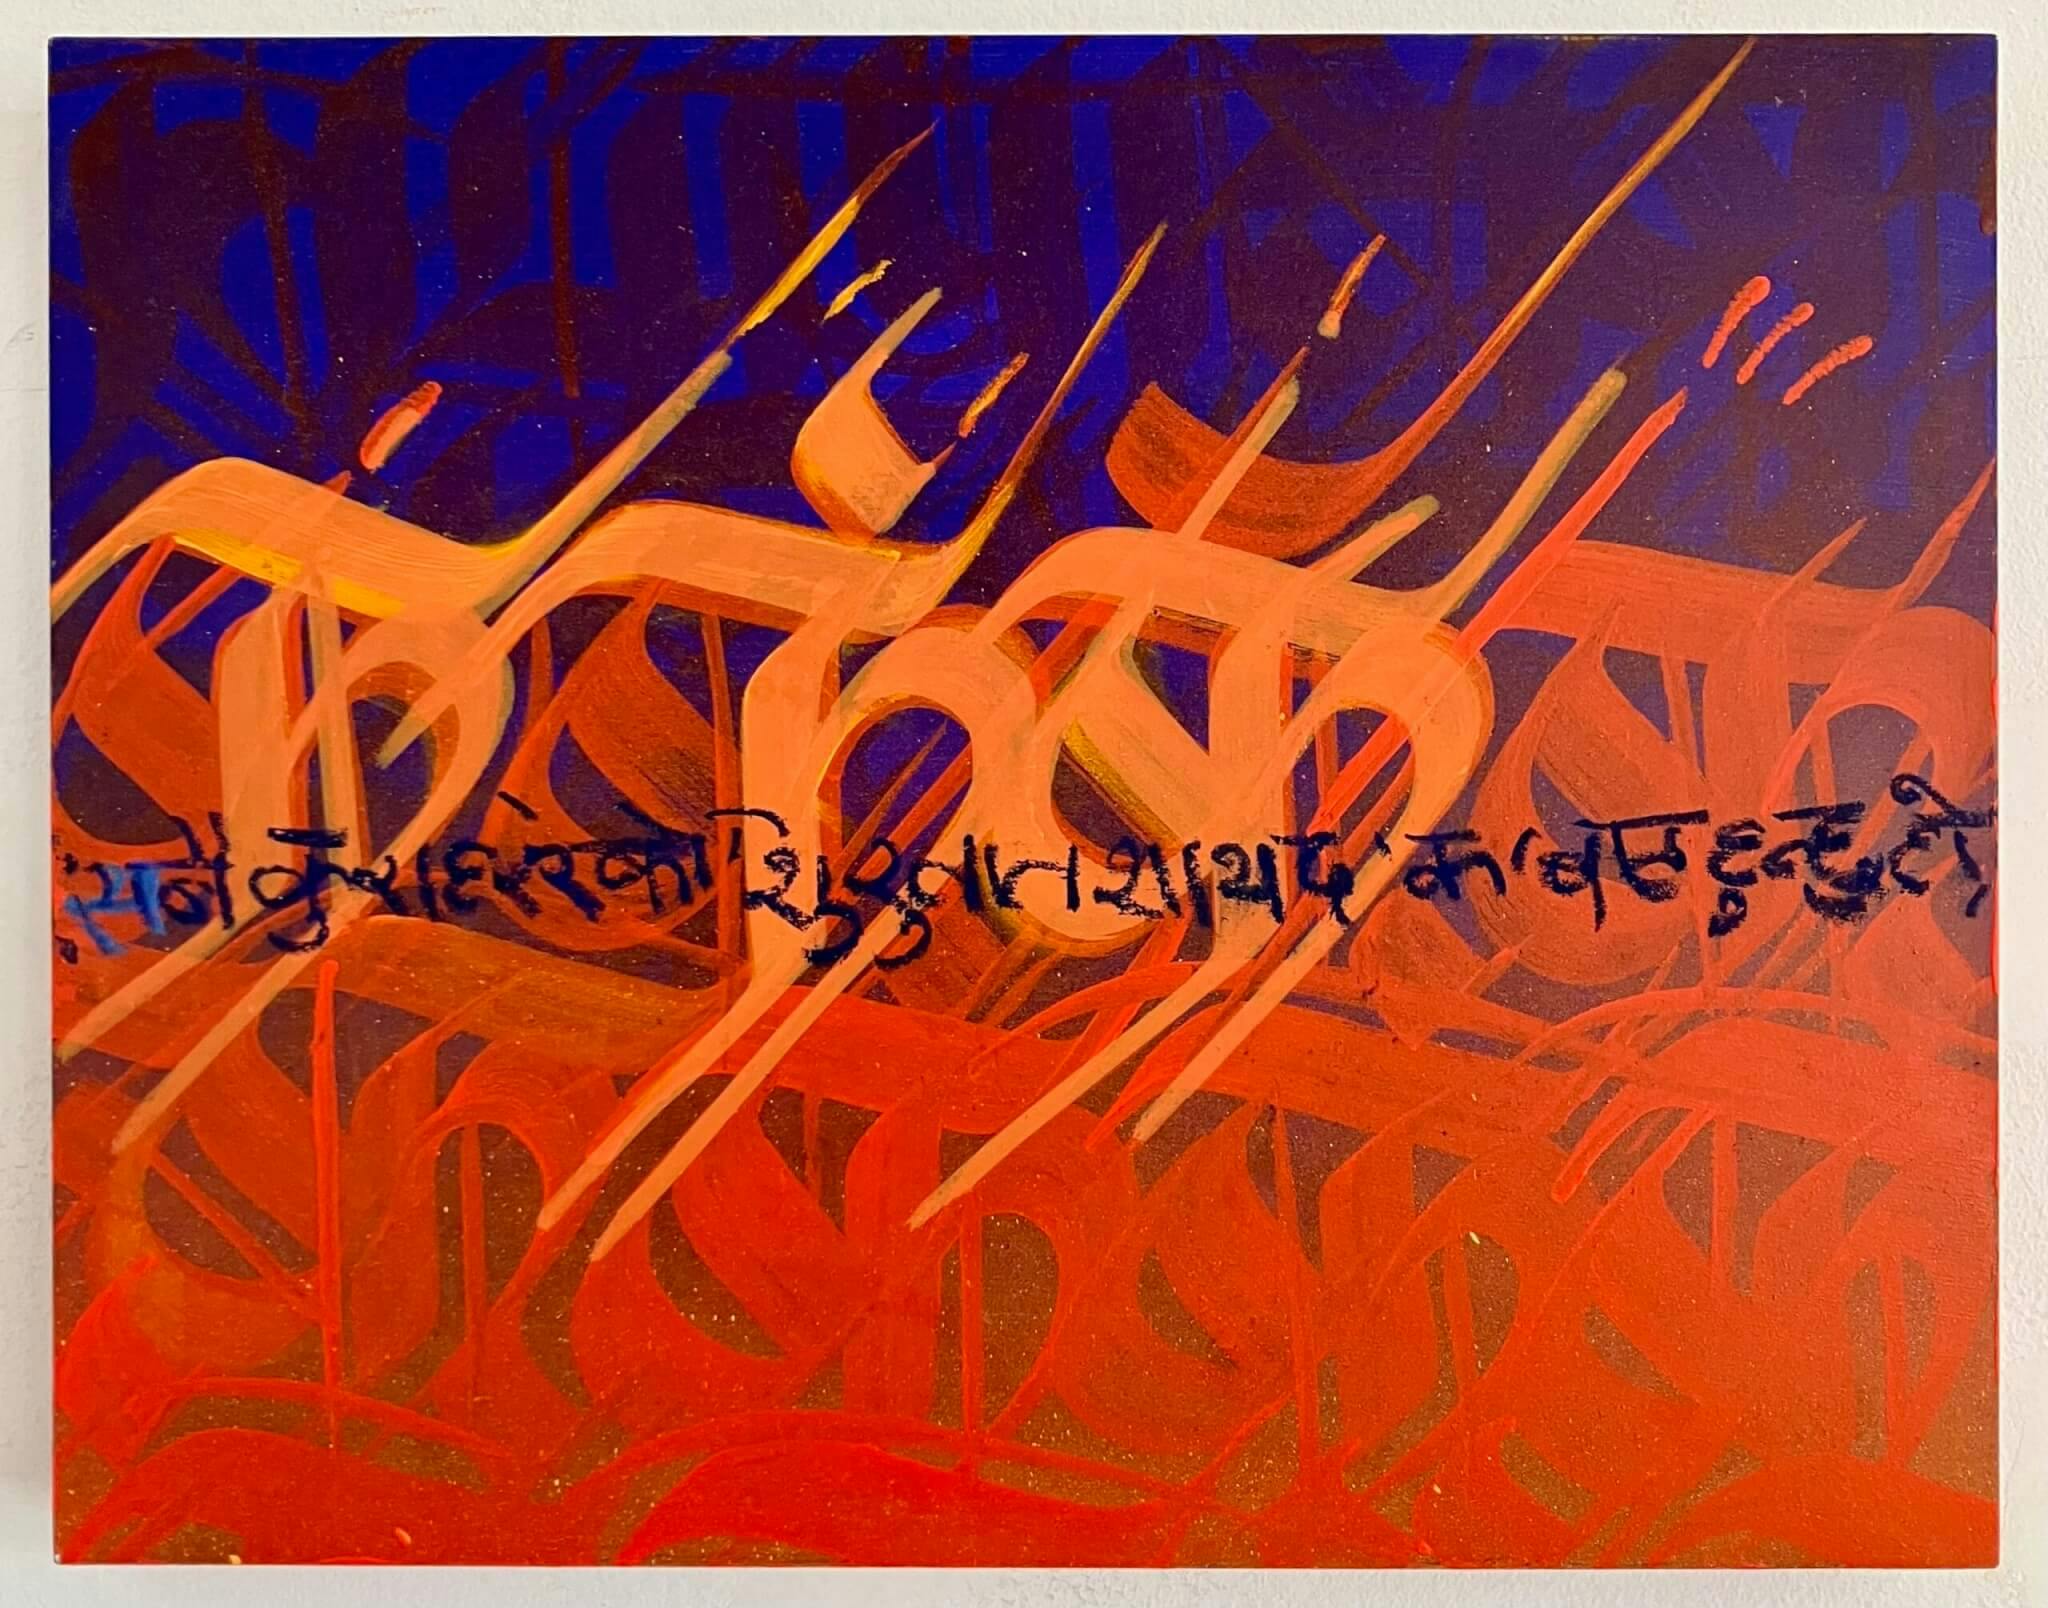 An abstract painting by Sneha Shrestha featuring bold orange and blue colors.